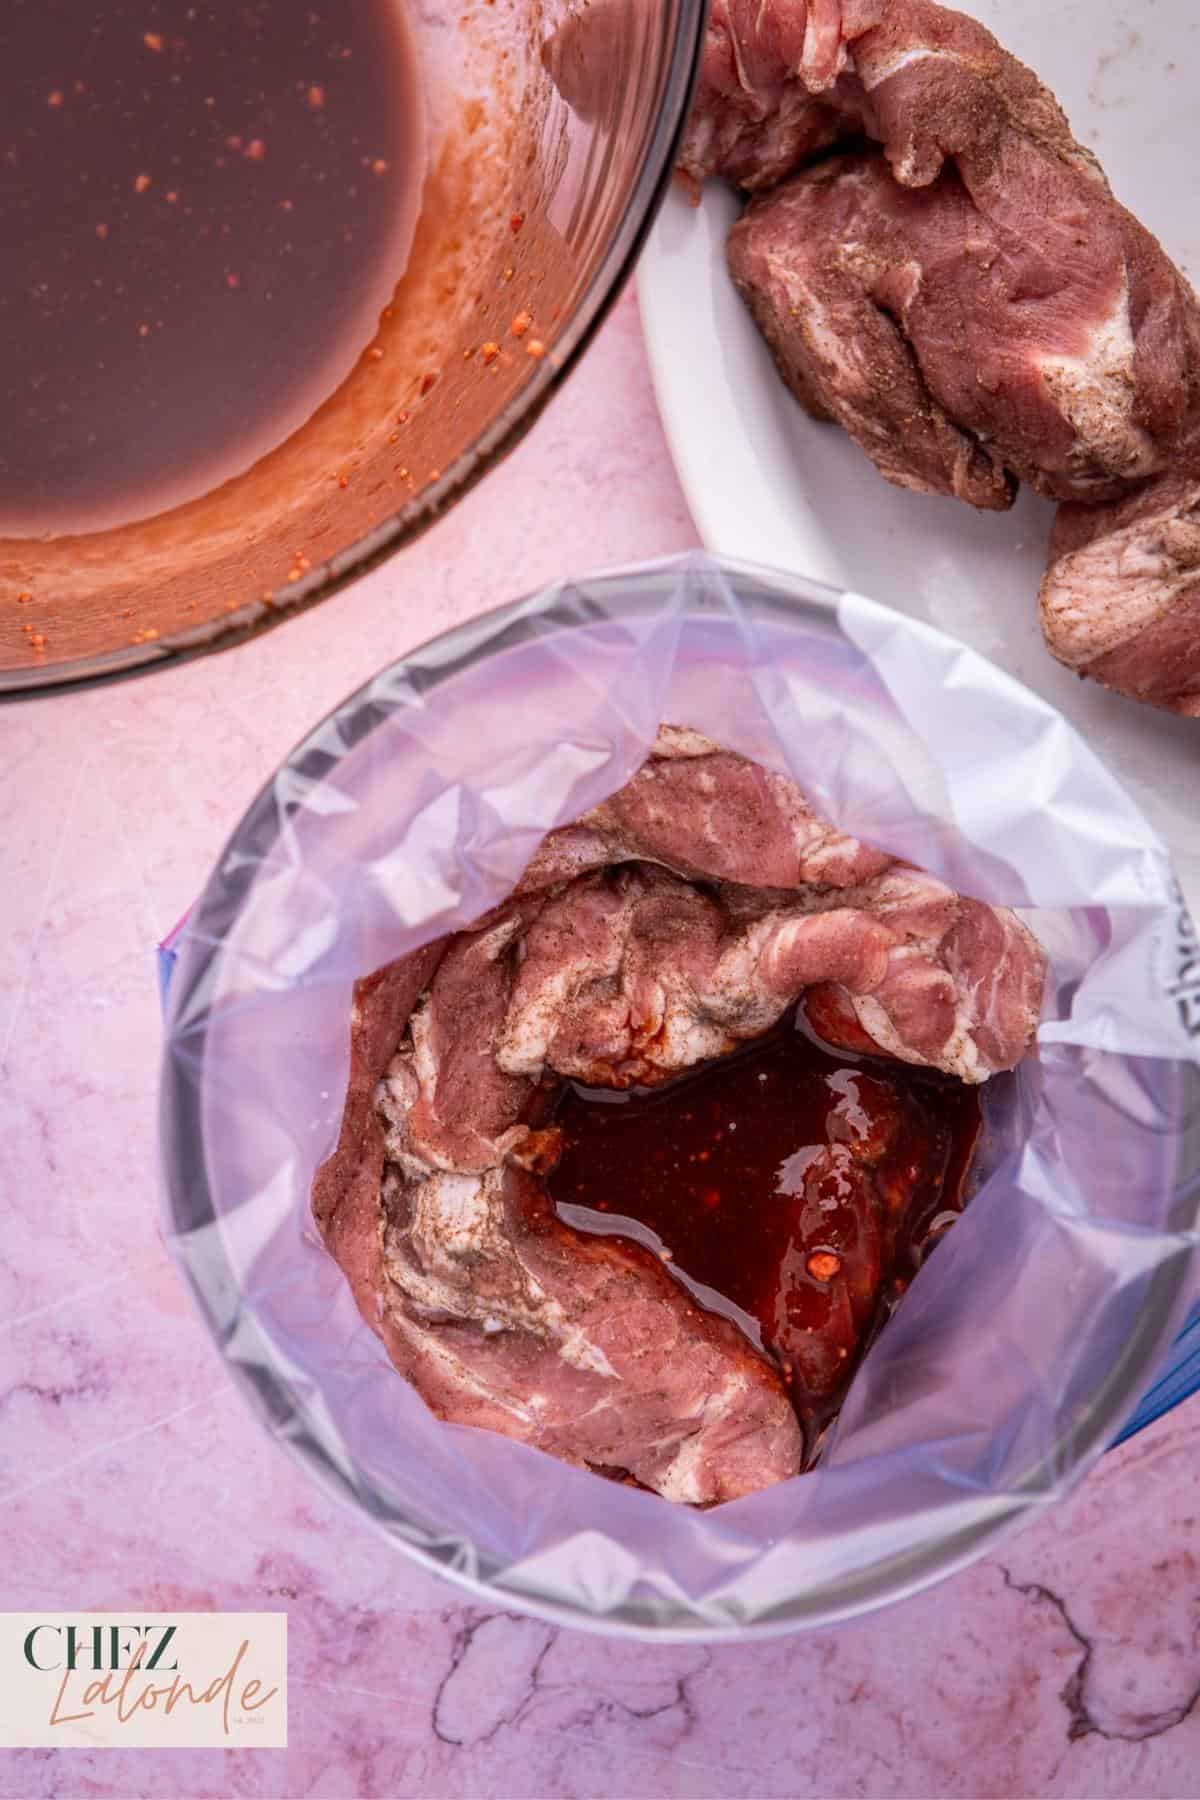 Position a freezer-grade Ziploc bag atop a slender bowl, carefully nestling the pork within the bag's confines. Proceed to pour the prepared Char Siu marinade into the bag. 